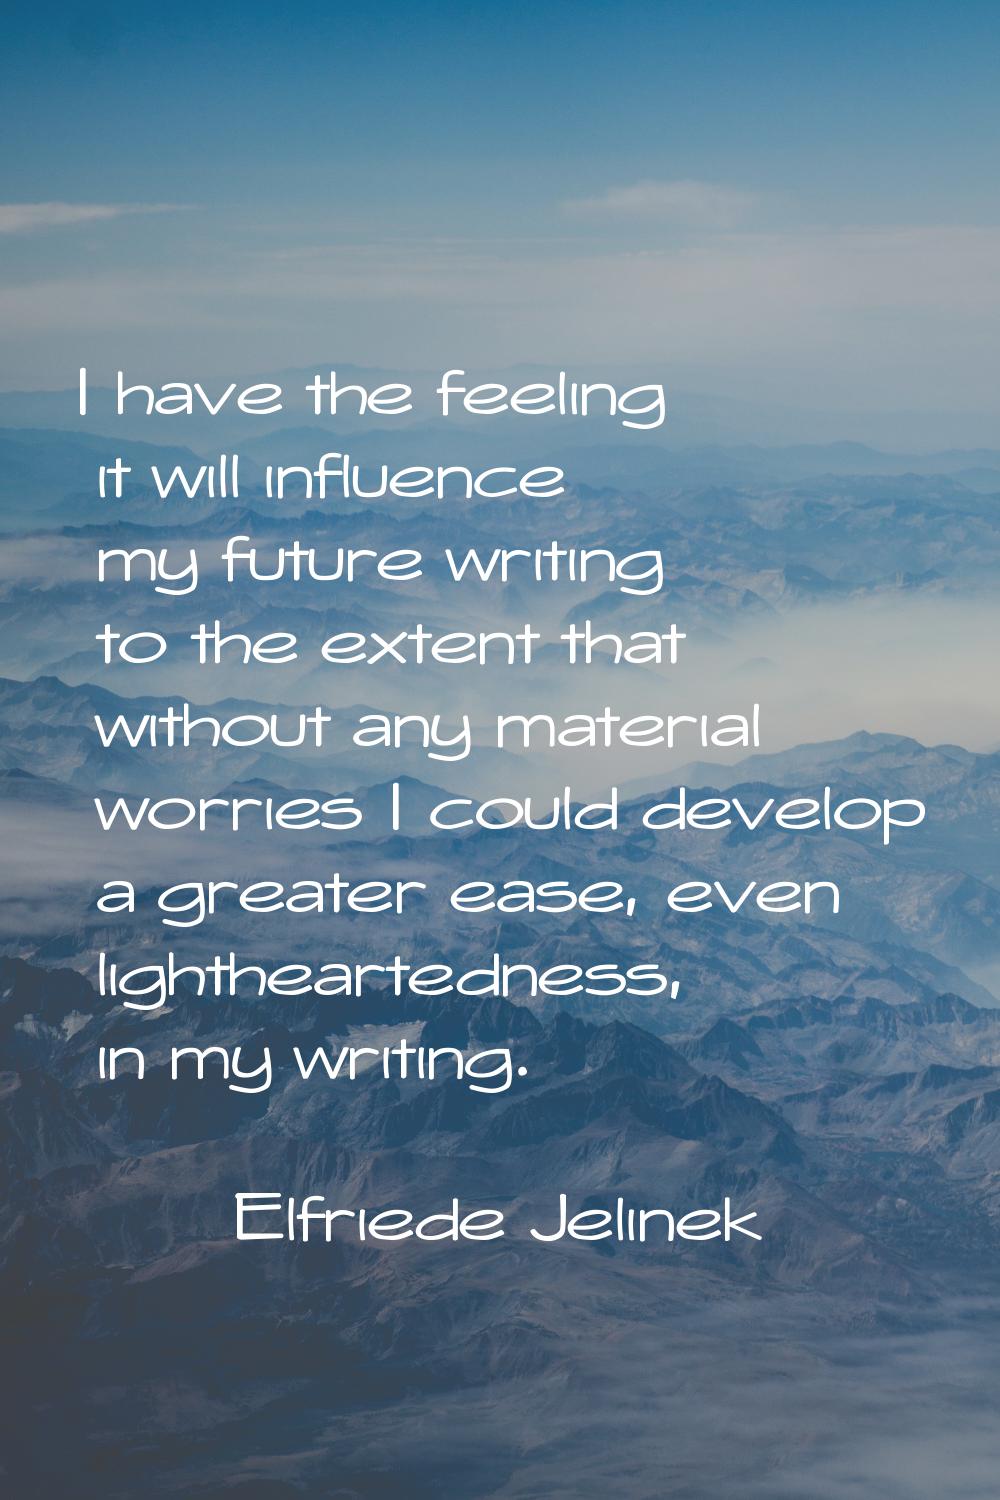 I have the feeling it will influence my future writing to the extent that without any material worr